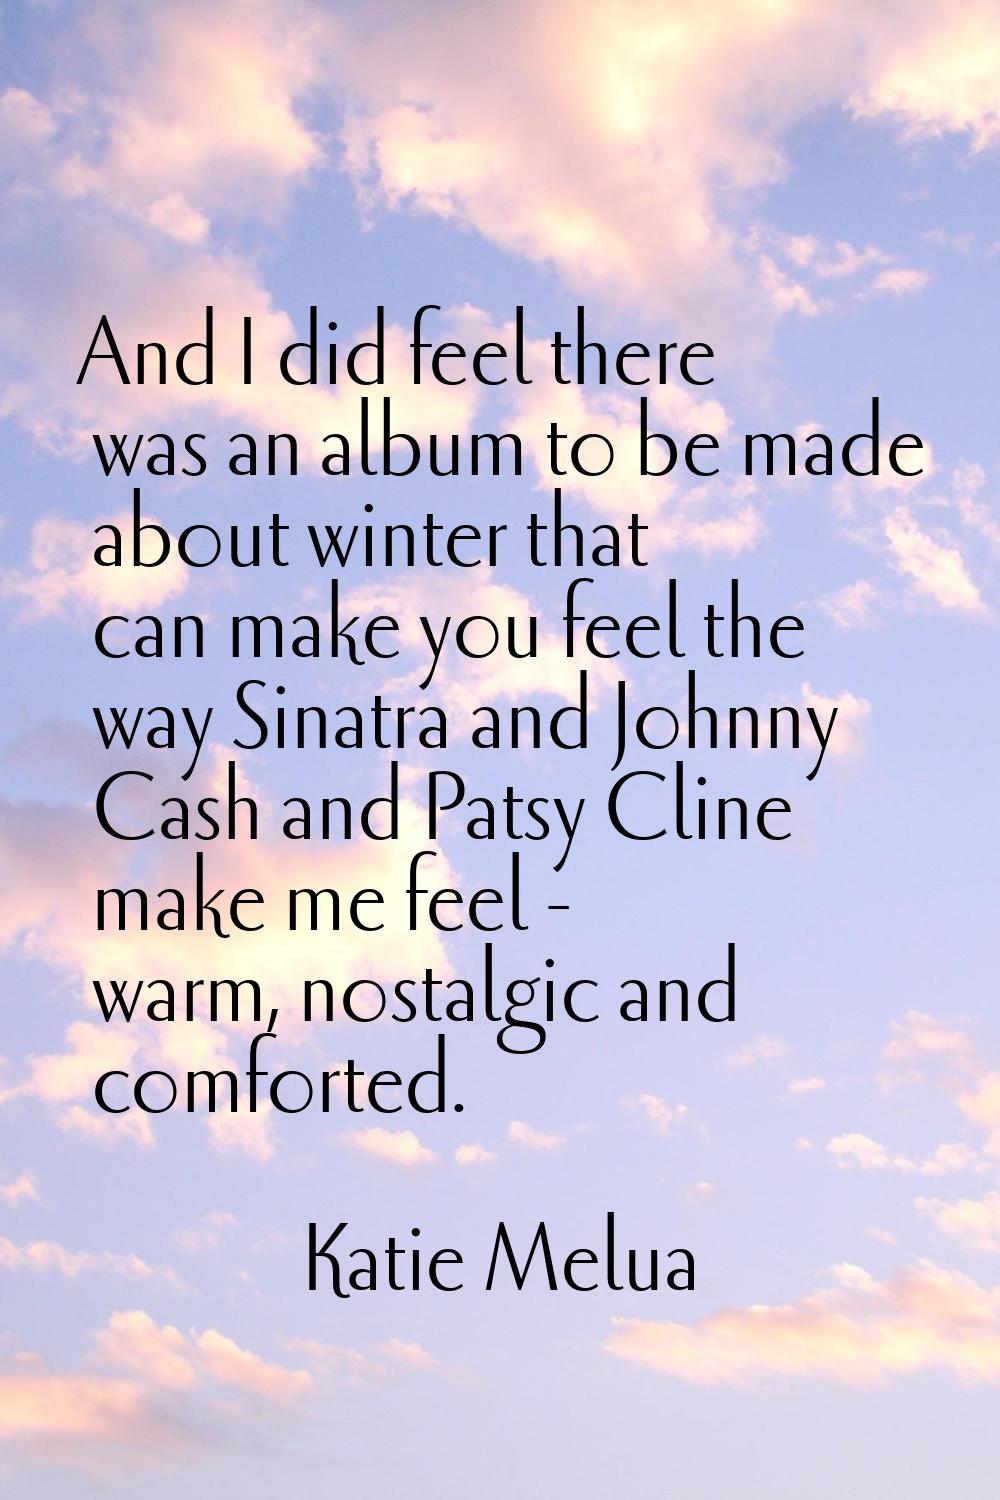 And I did feel there was an album to be made about winter that can make you feel the way Sinatra an